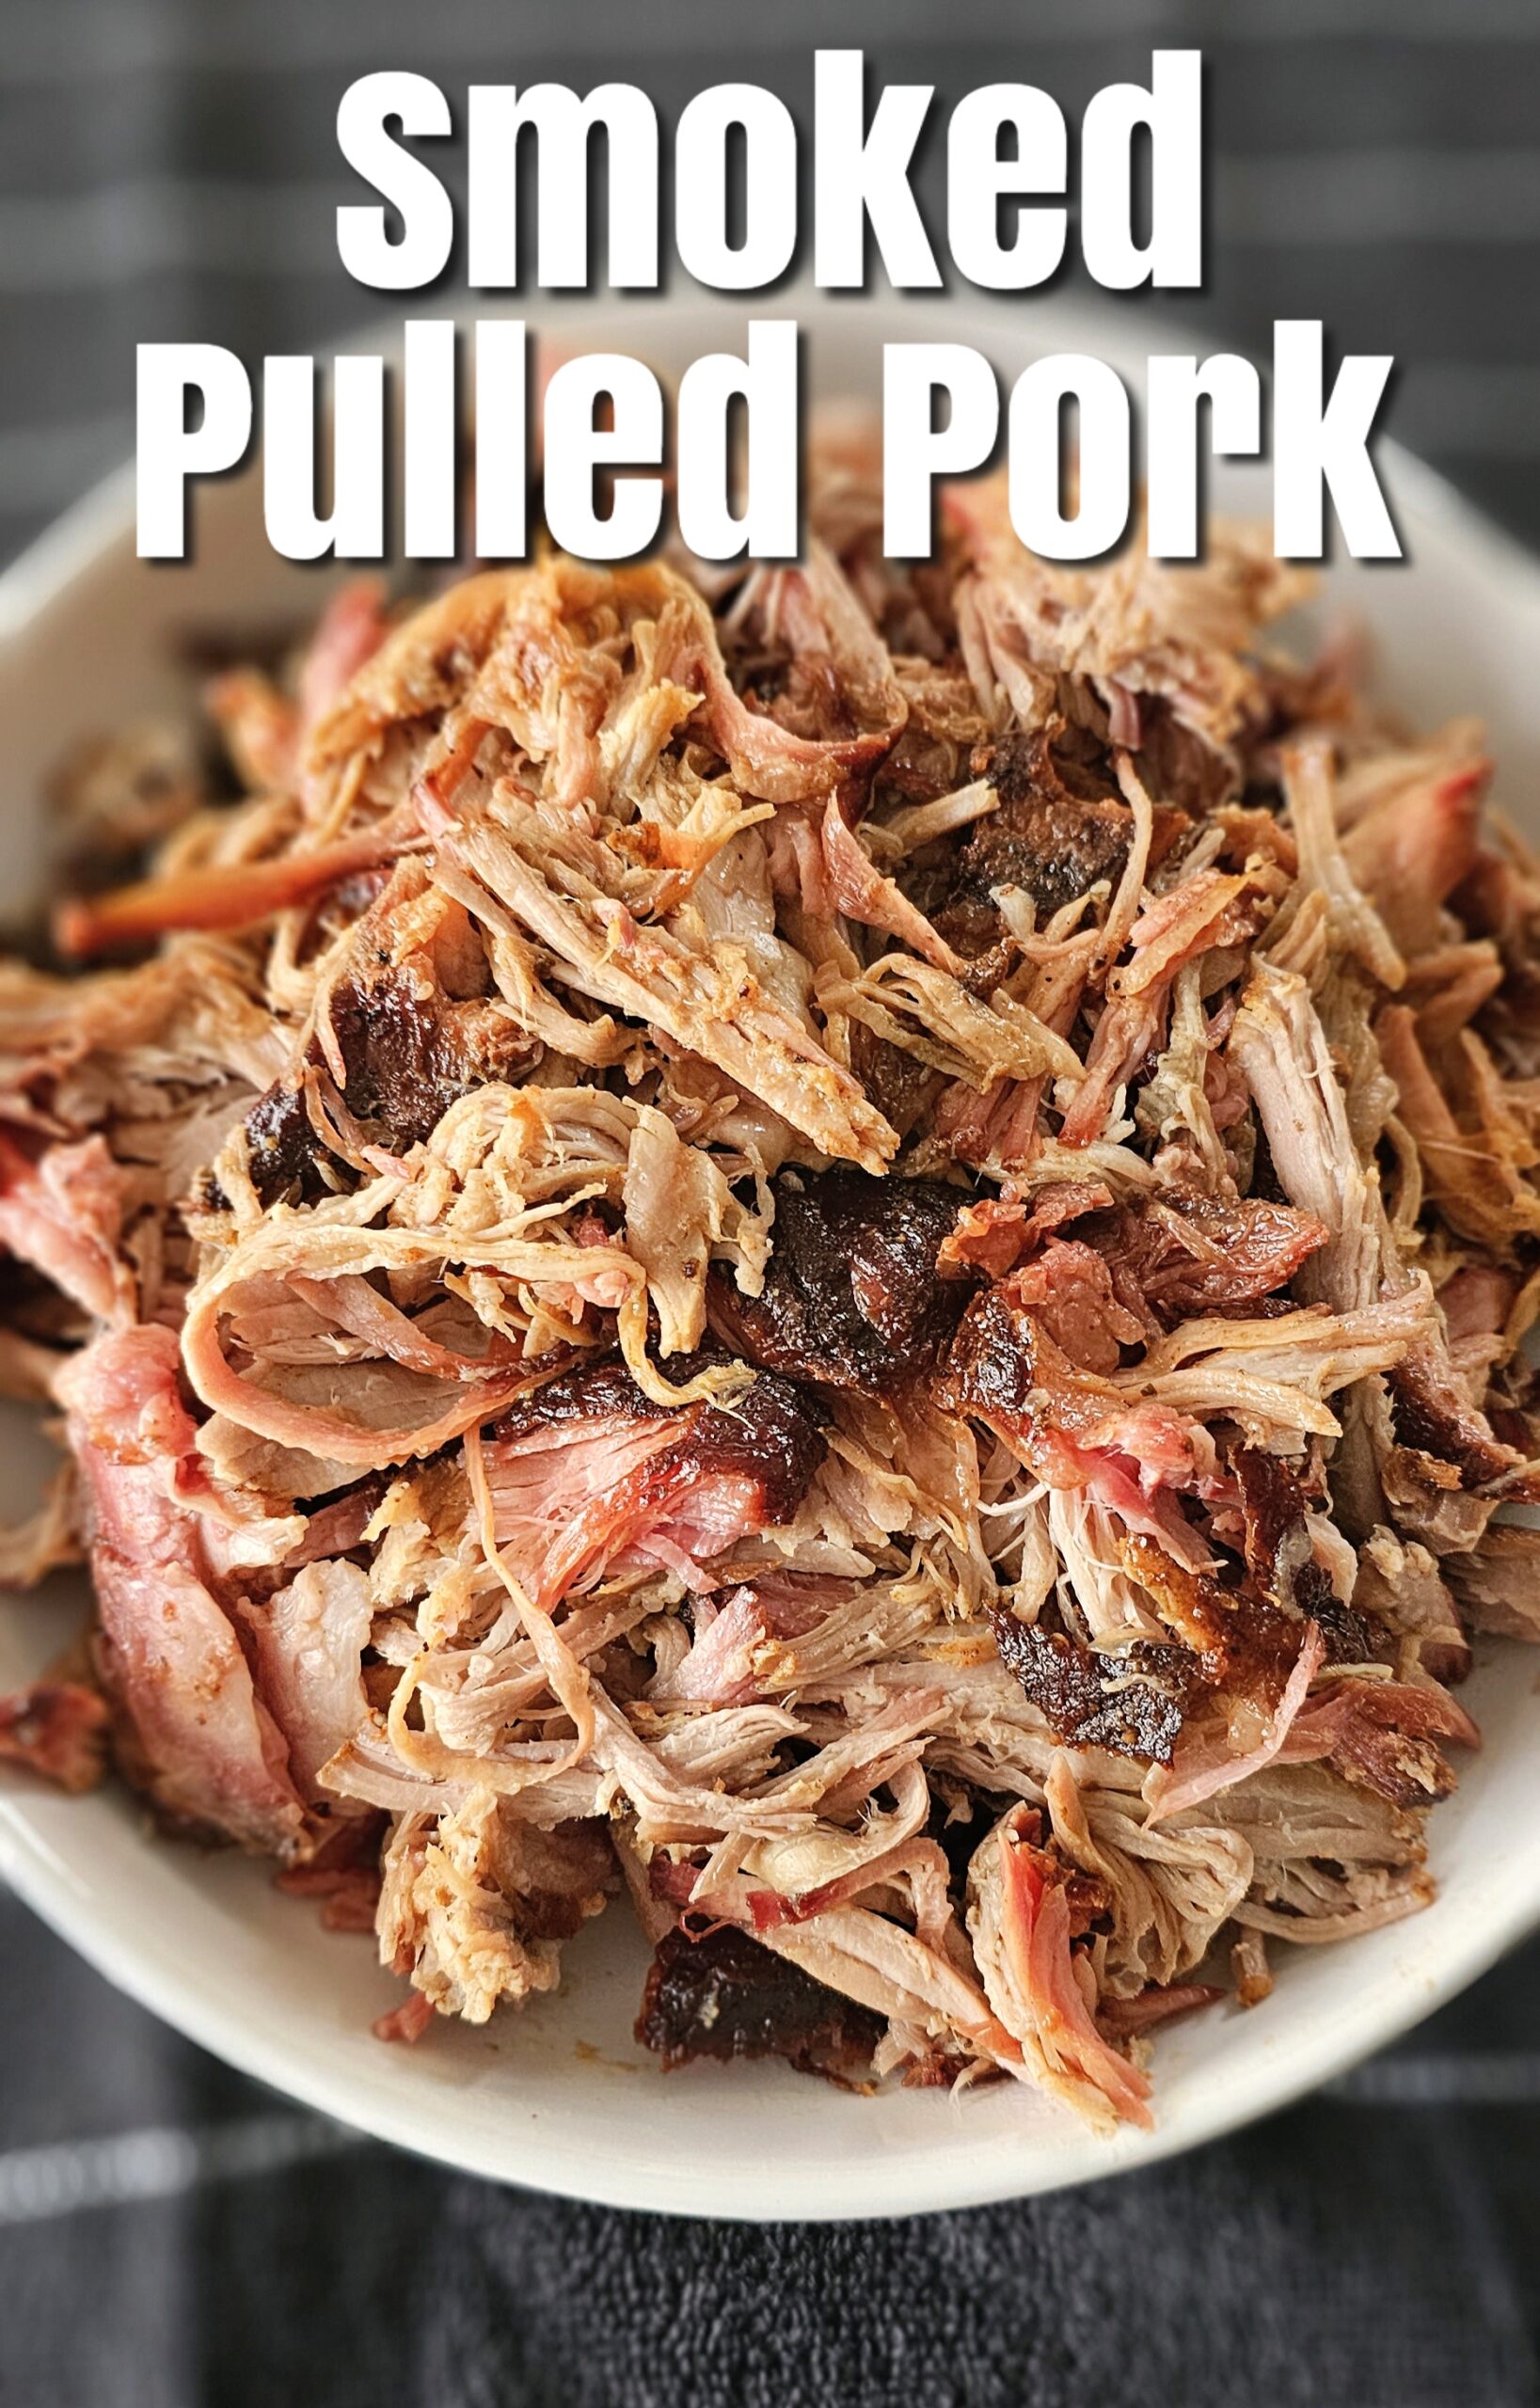 How To Make Slow-Smoked Pulled Pork